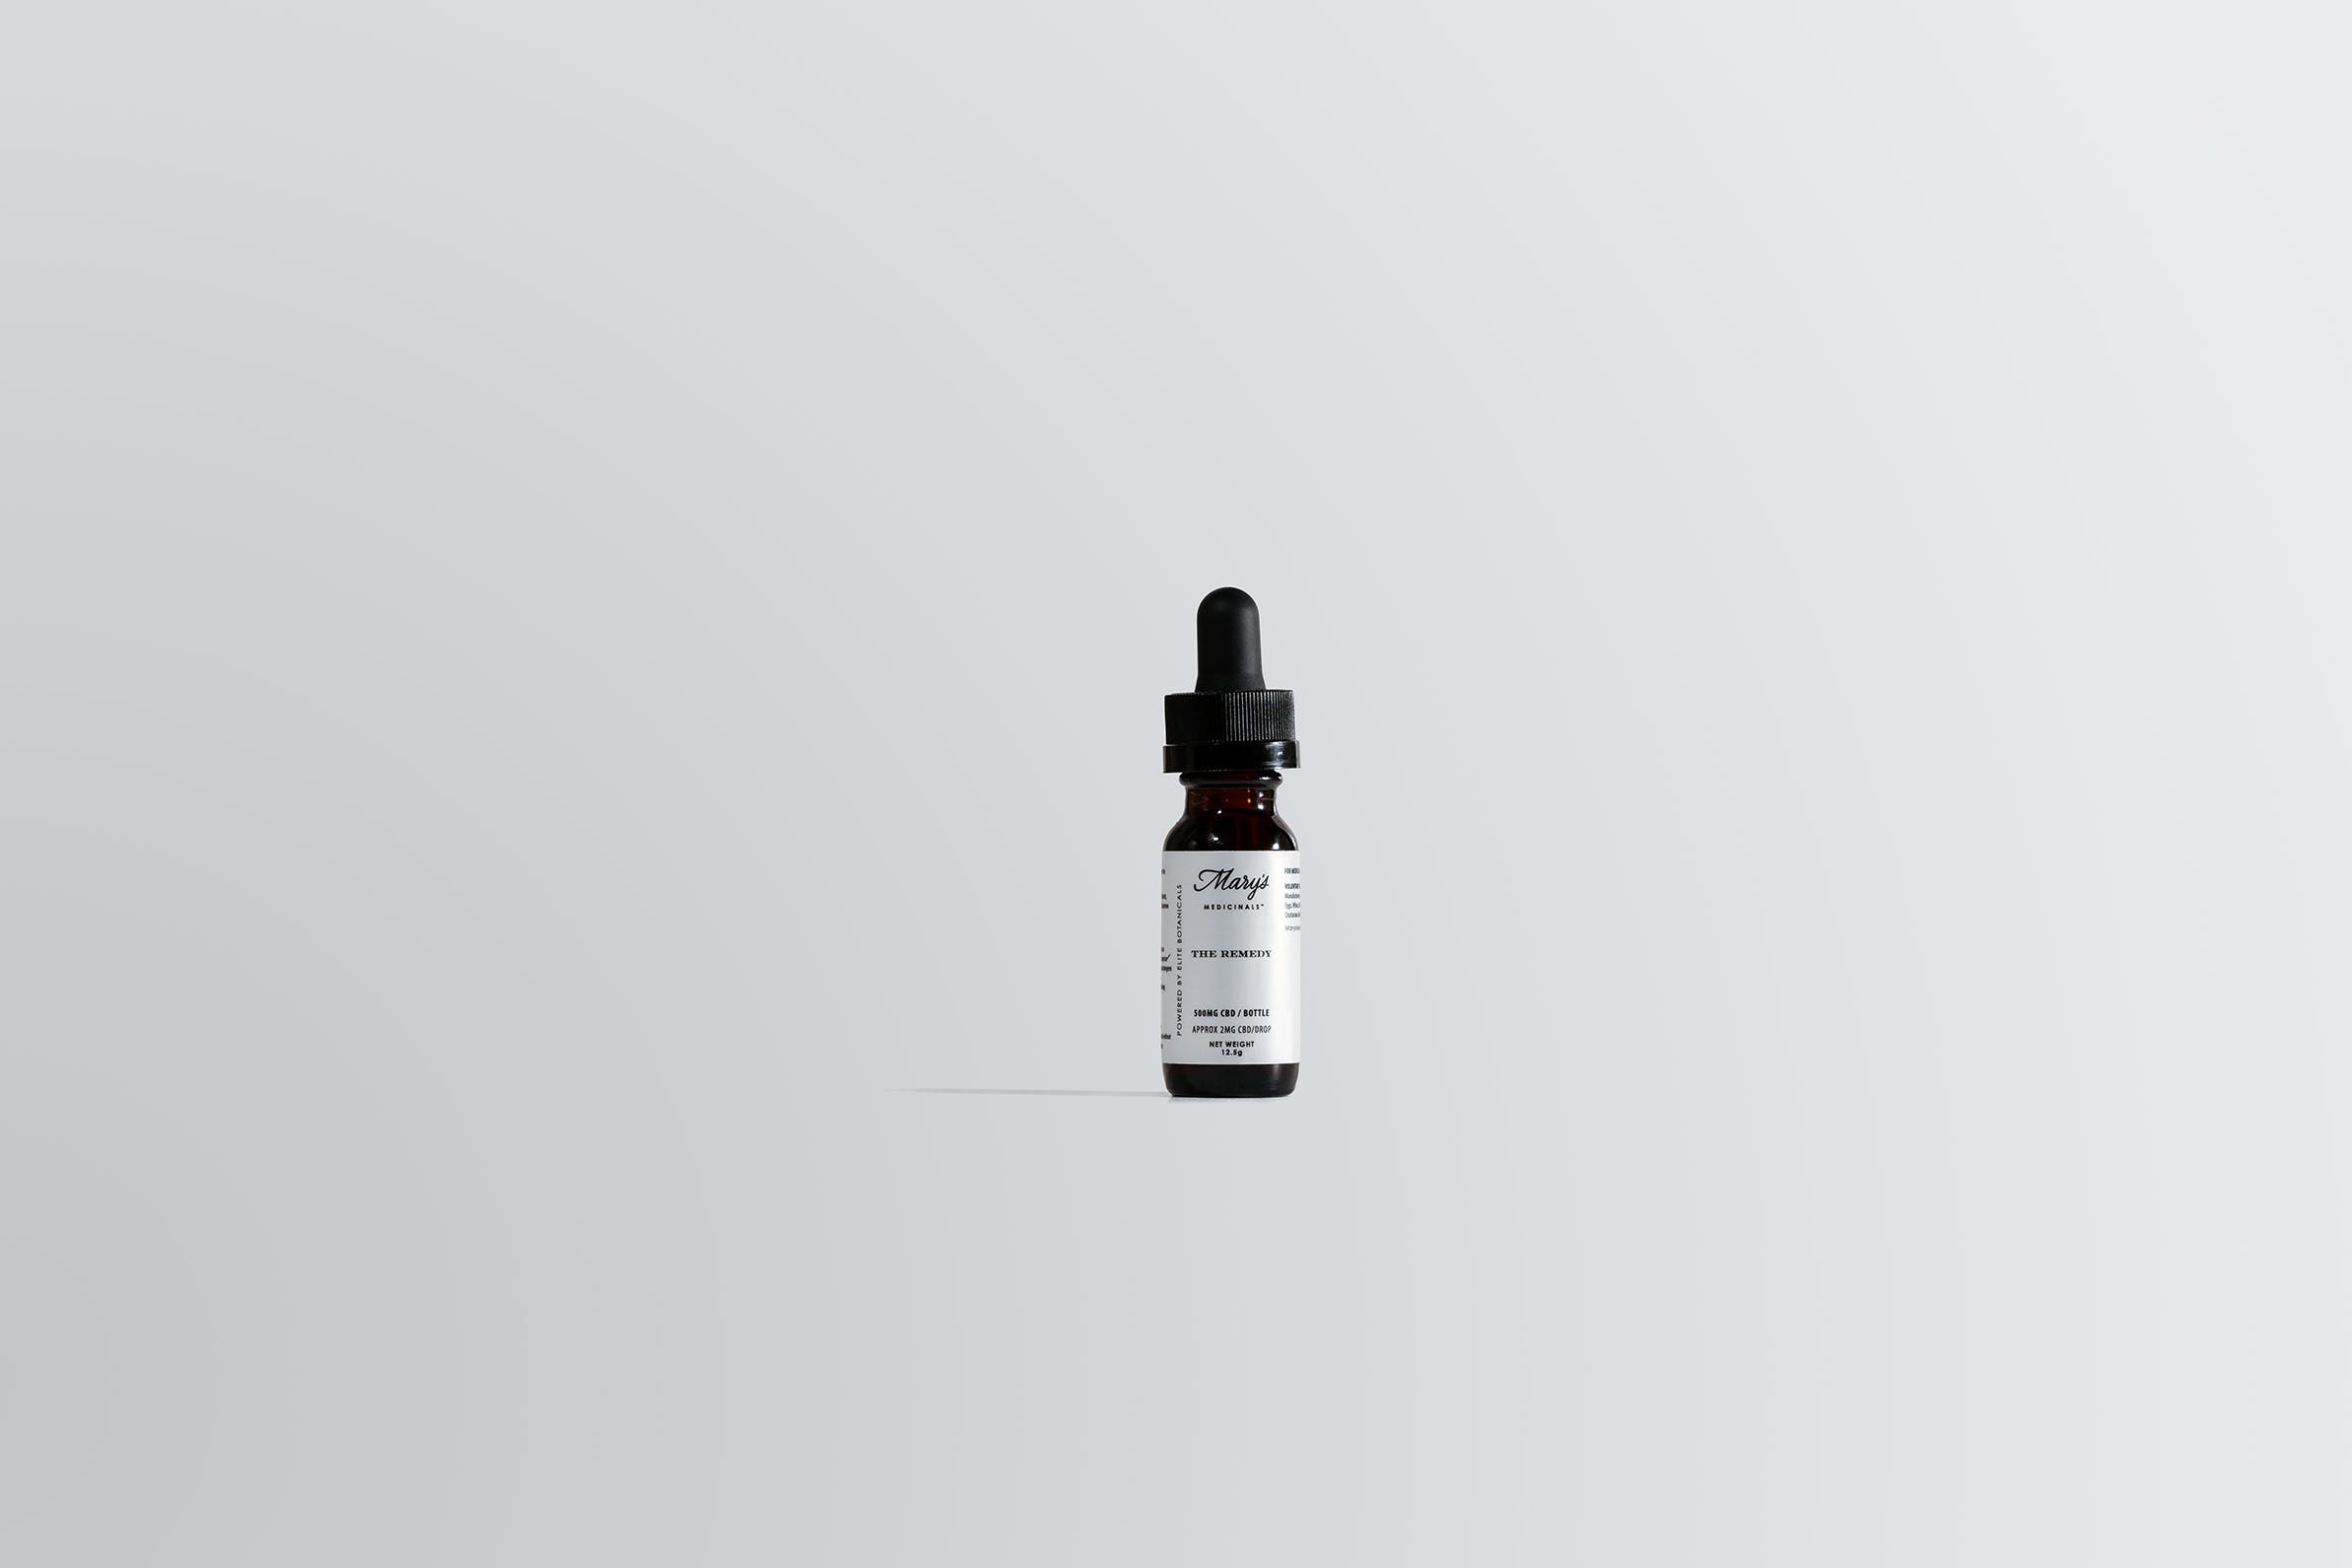 tincture-marys-medicinals-500mg-remedy-tincture